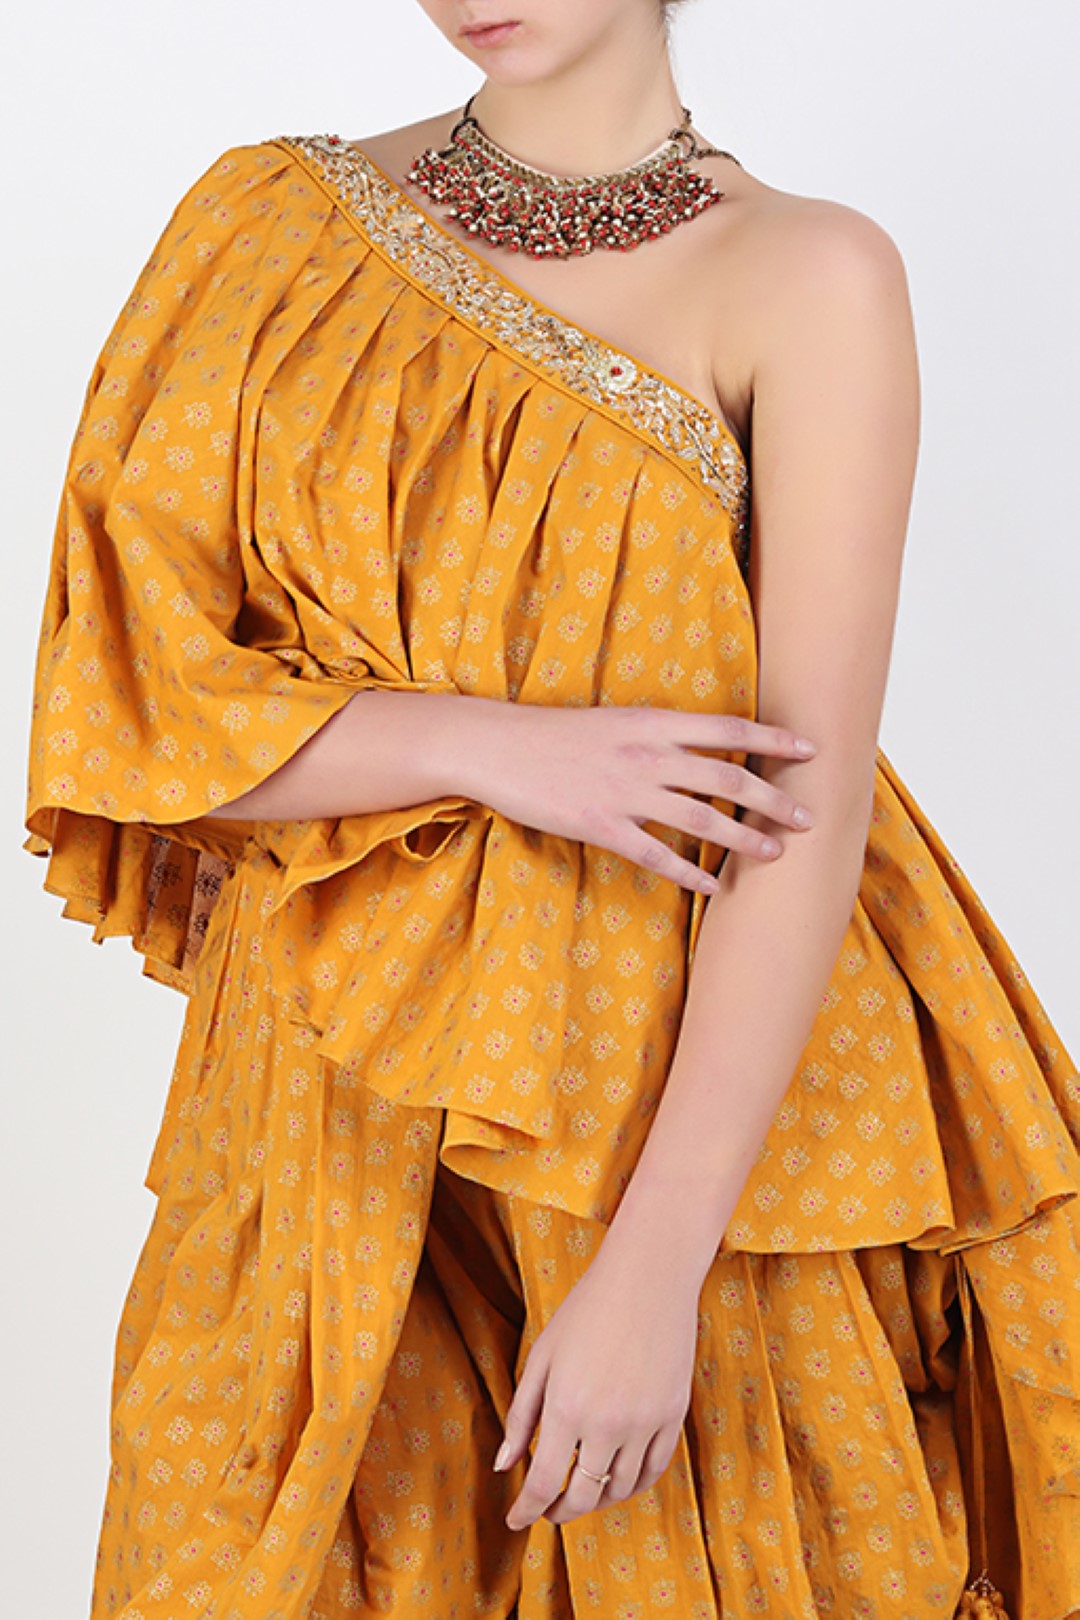 OCHRE SCREEN PRINTED ONE OFF SHOULDER TOP WITH SCREEN PRINTED COWL DHOTI